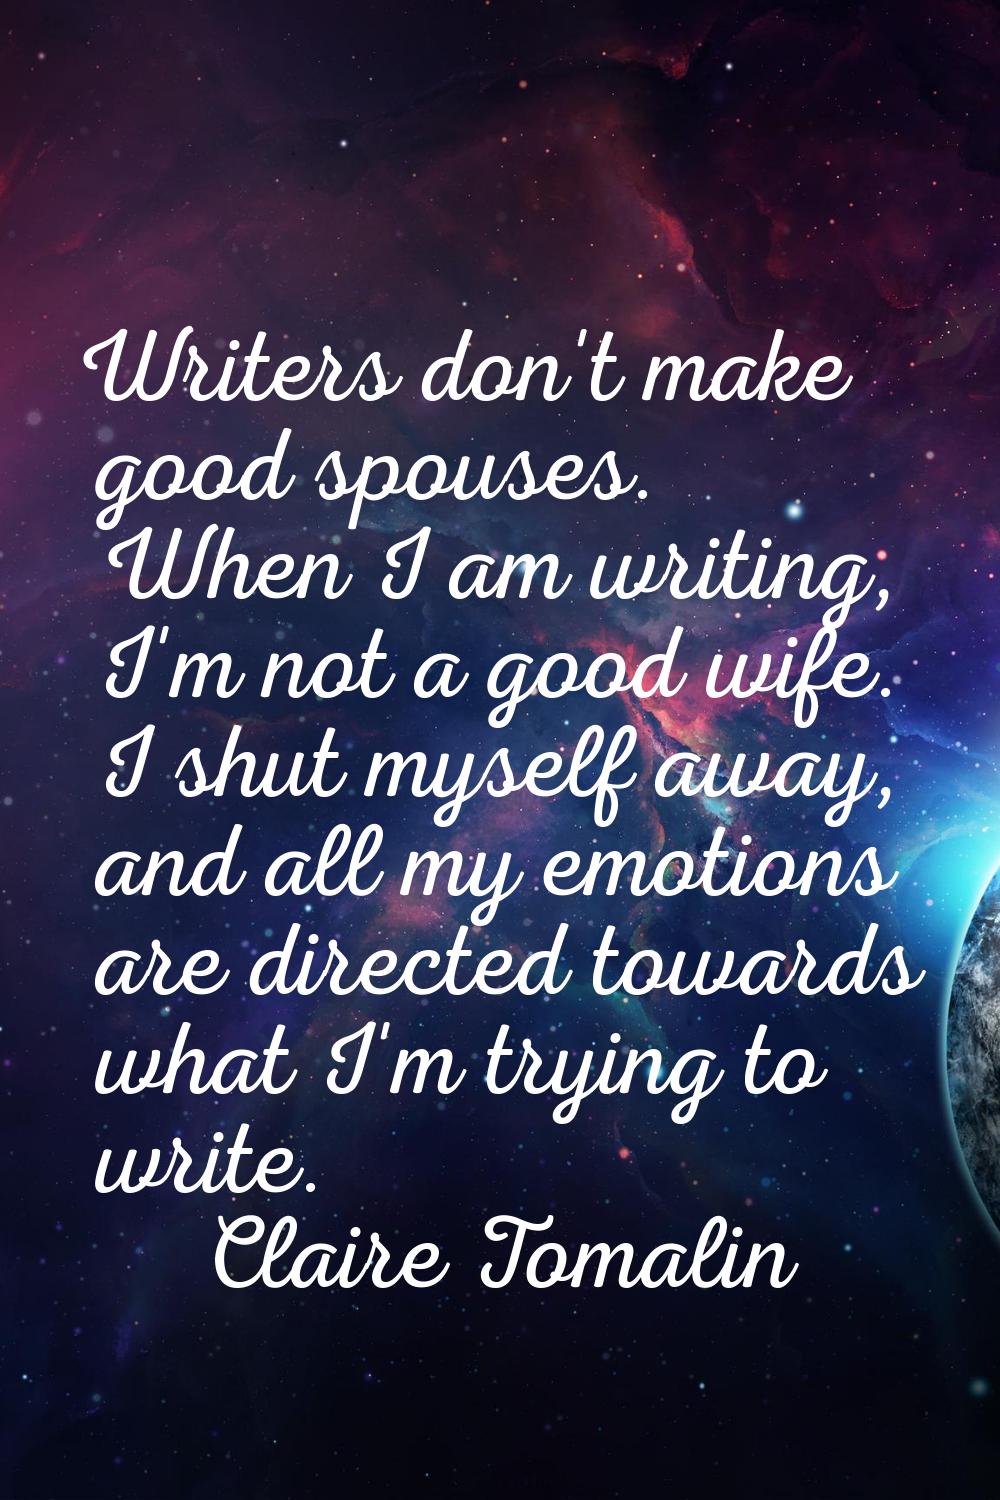 Writers don't make good spouses. When I am writing, I'm not a good wife. I shut myself away, and al